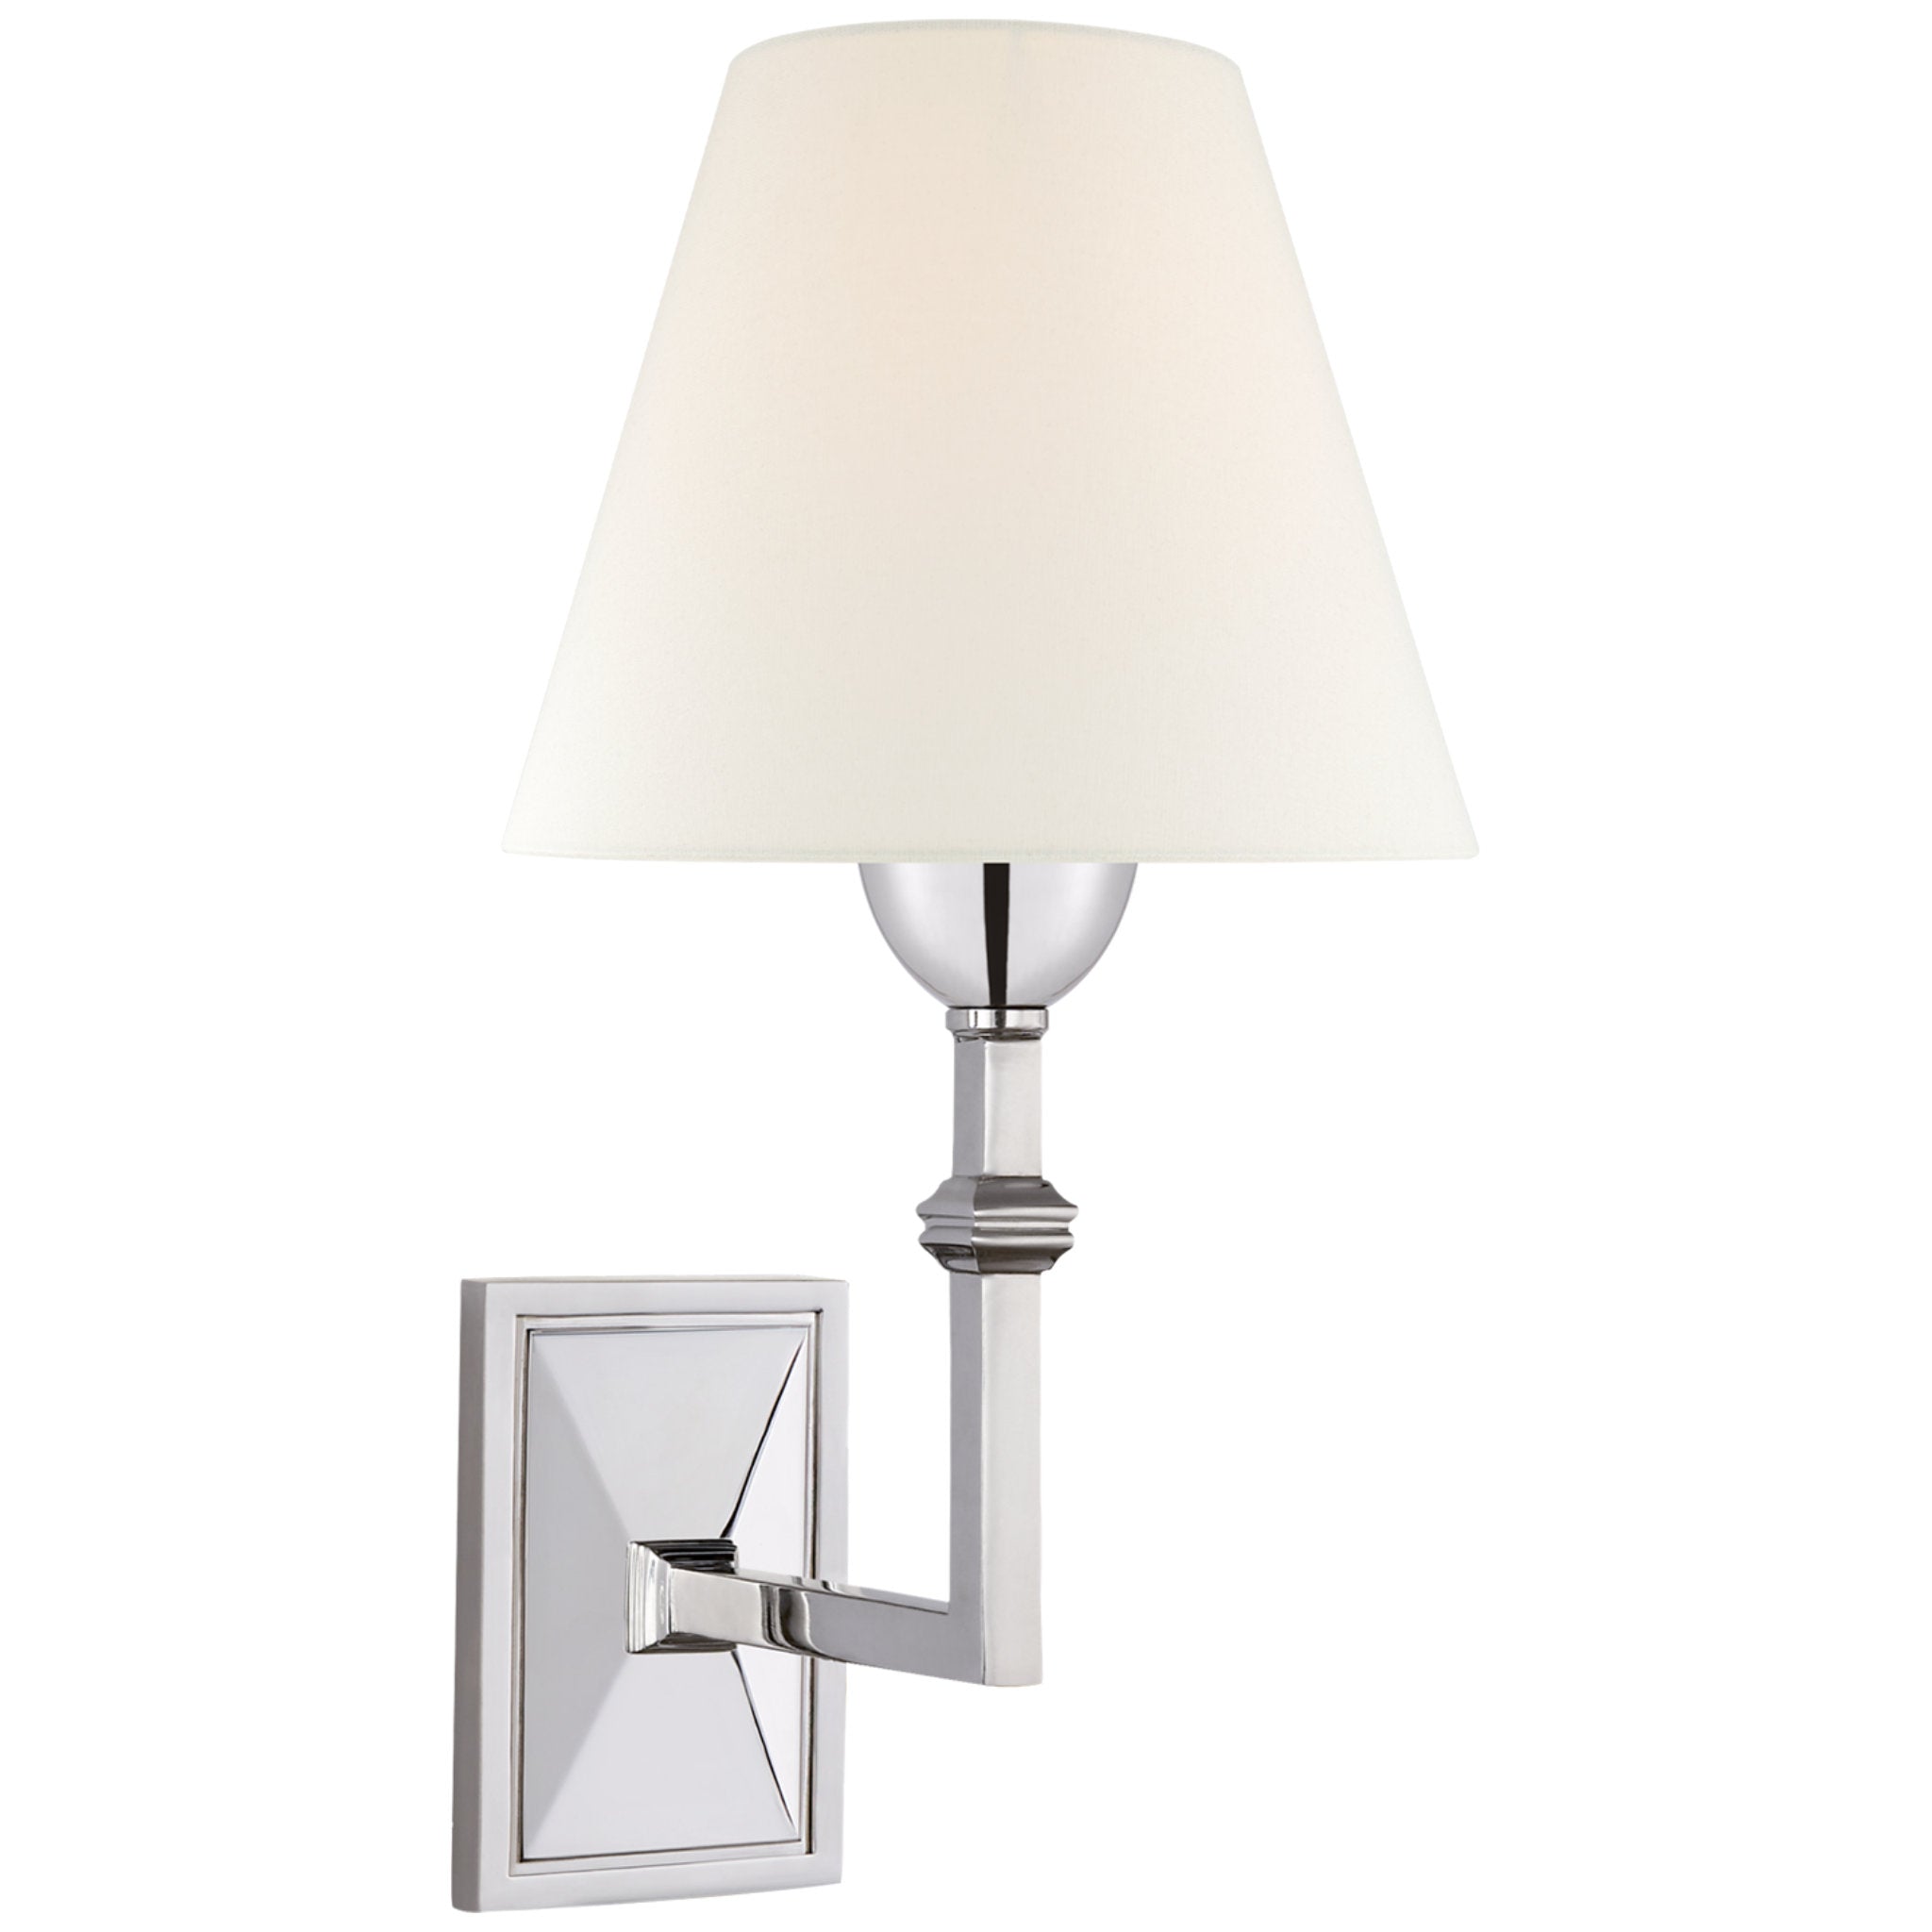 Alexa Hampton Jane Wall Sconce in Polished Nickel with Linen Shade